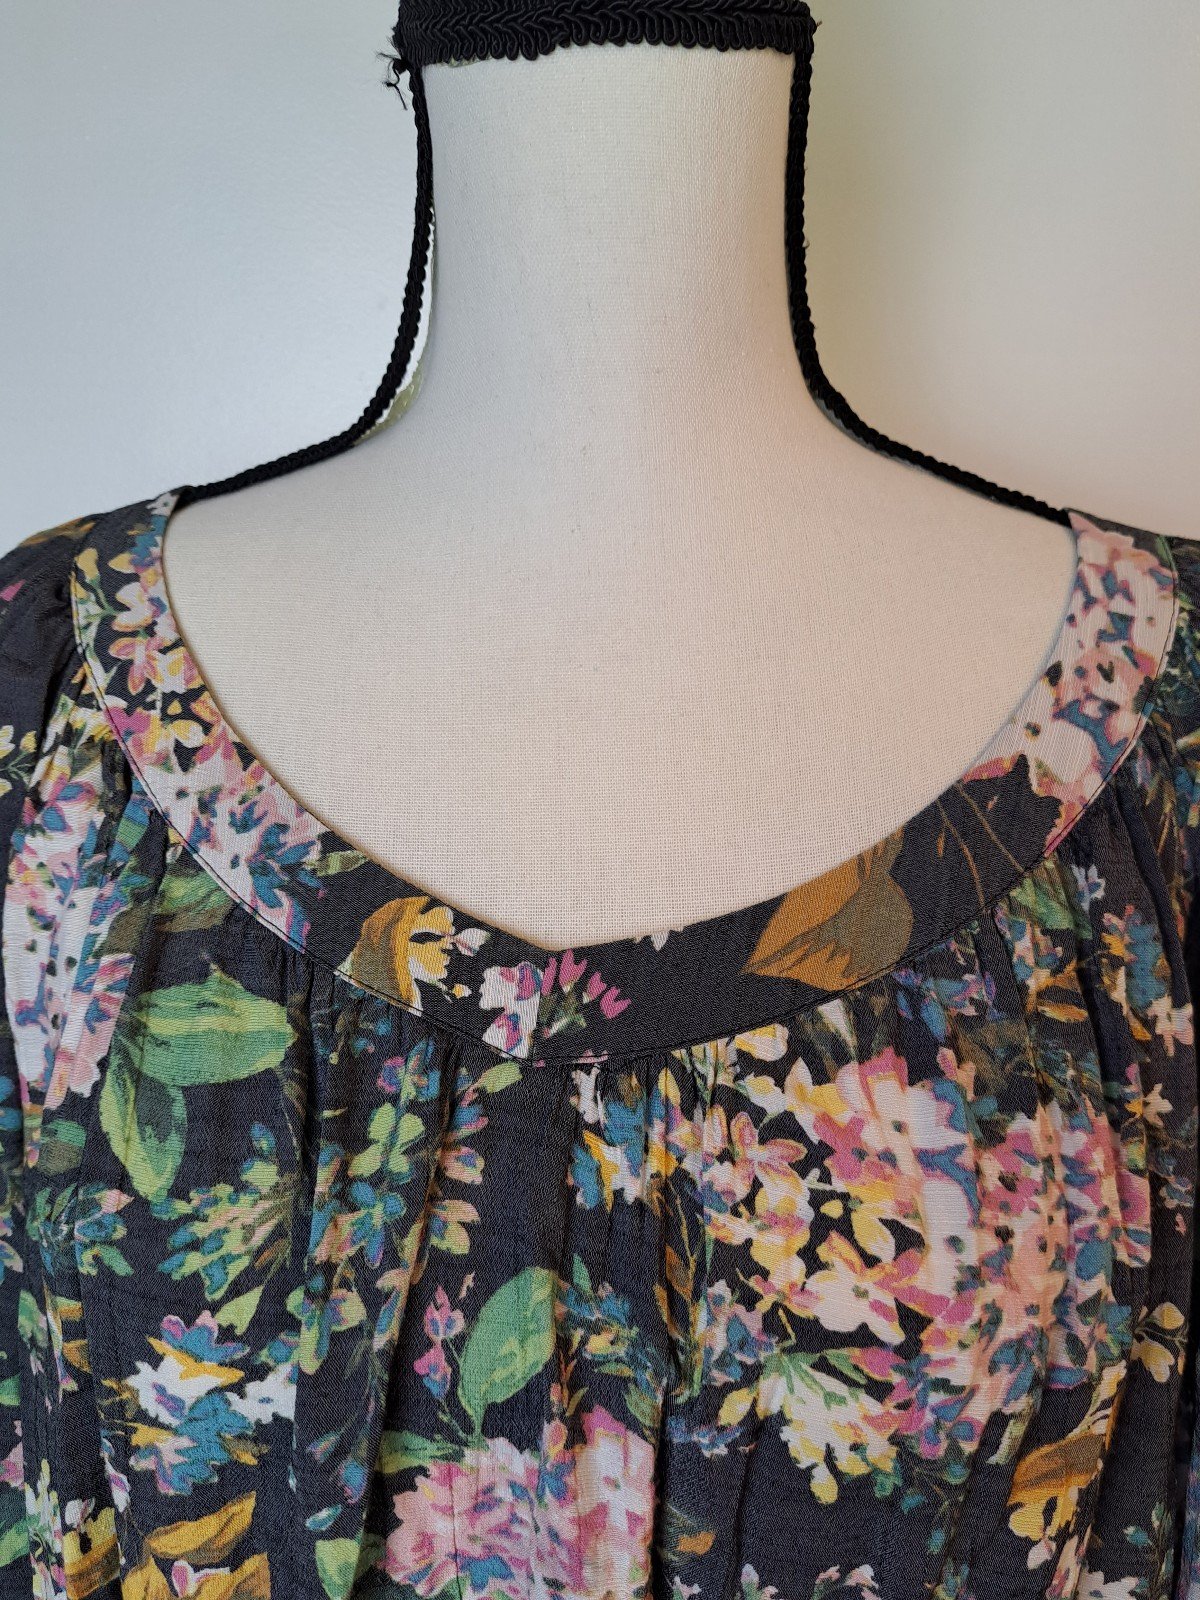 Stylish Lauren conrad XL ditzy floral charcoal gray peasant baloon sleeve blouse oF8MevW5H Buying Cheap